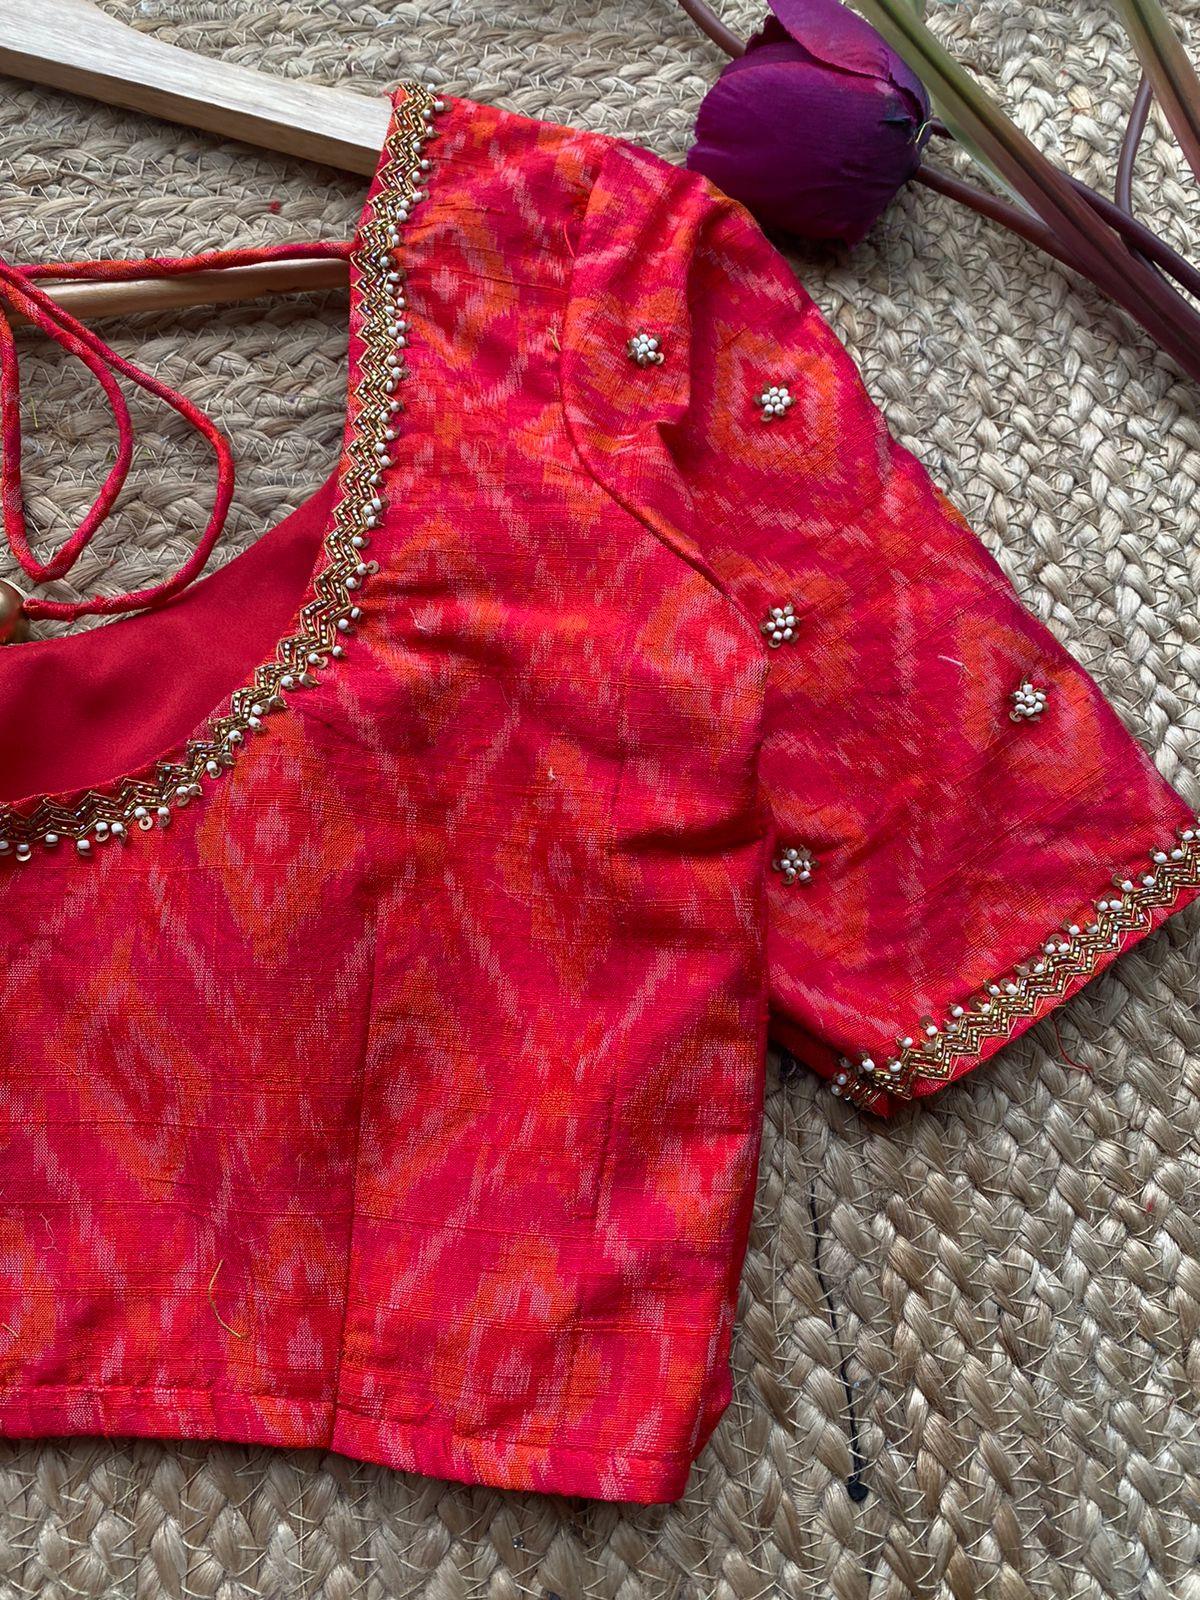 Tomato red ikkat hand worked blouse - Threads